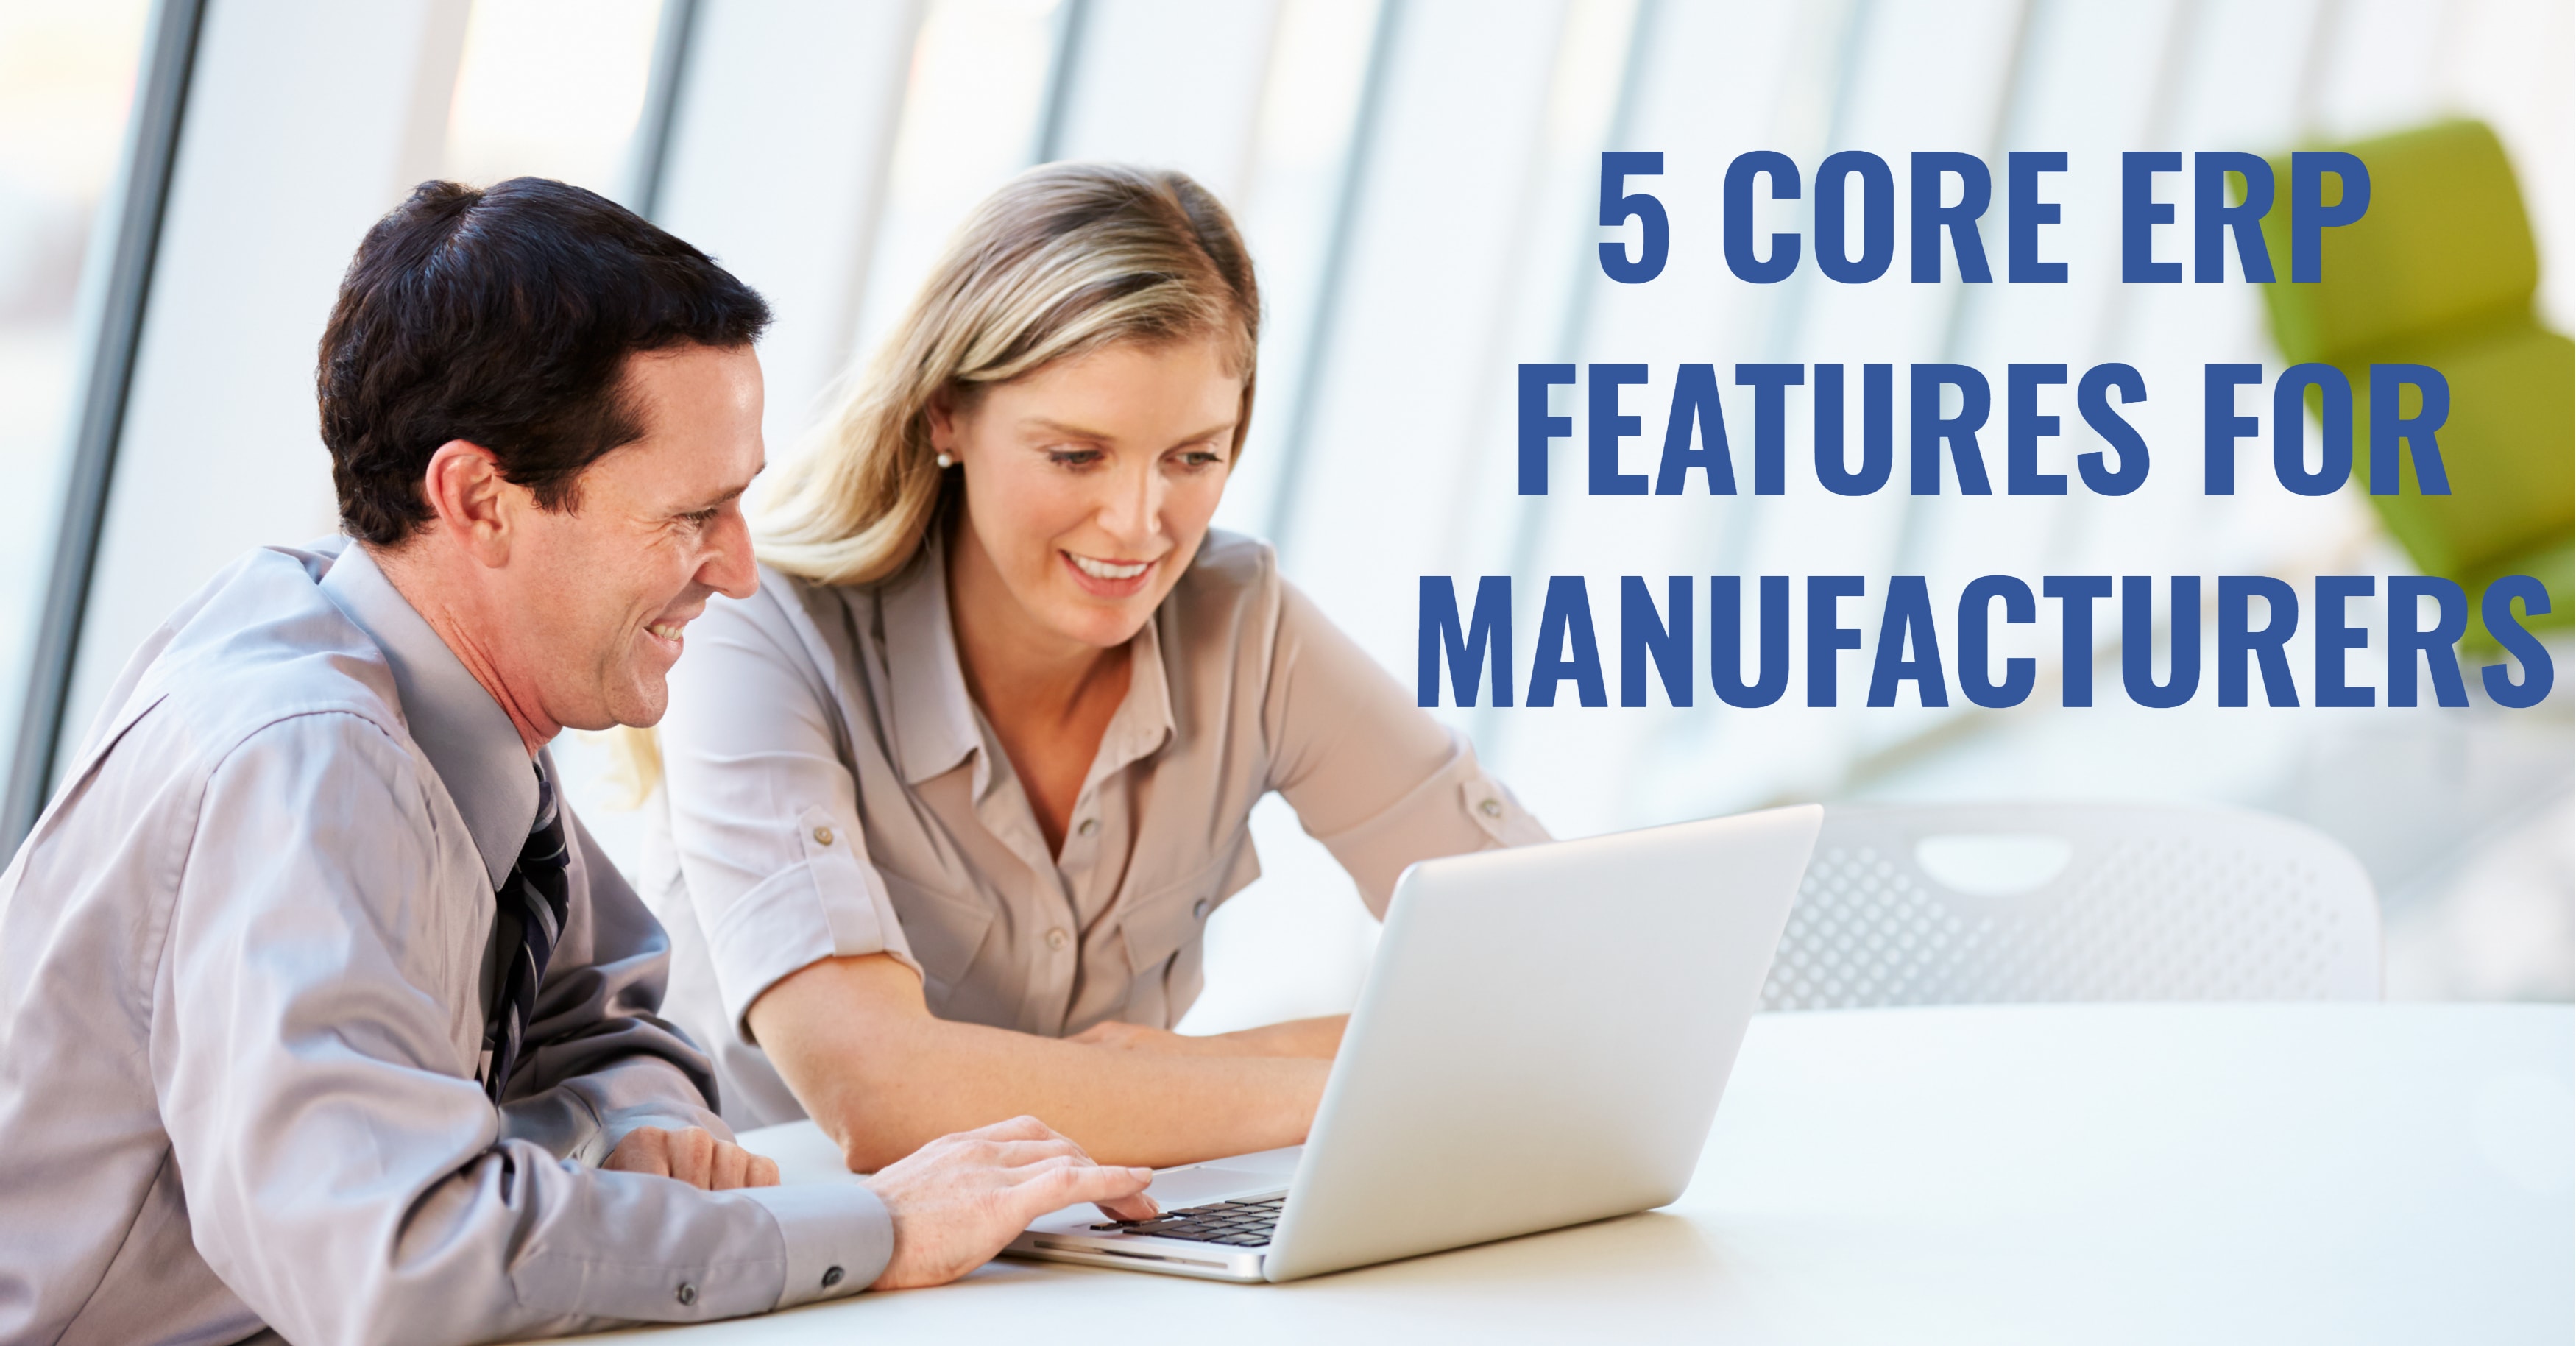 Core ERP Manufacturing Features